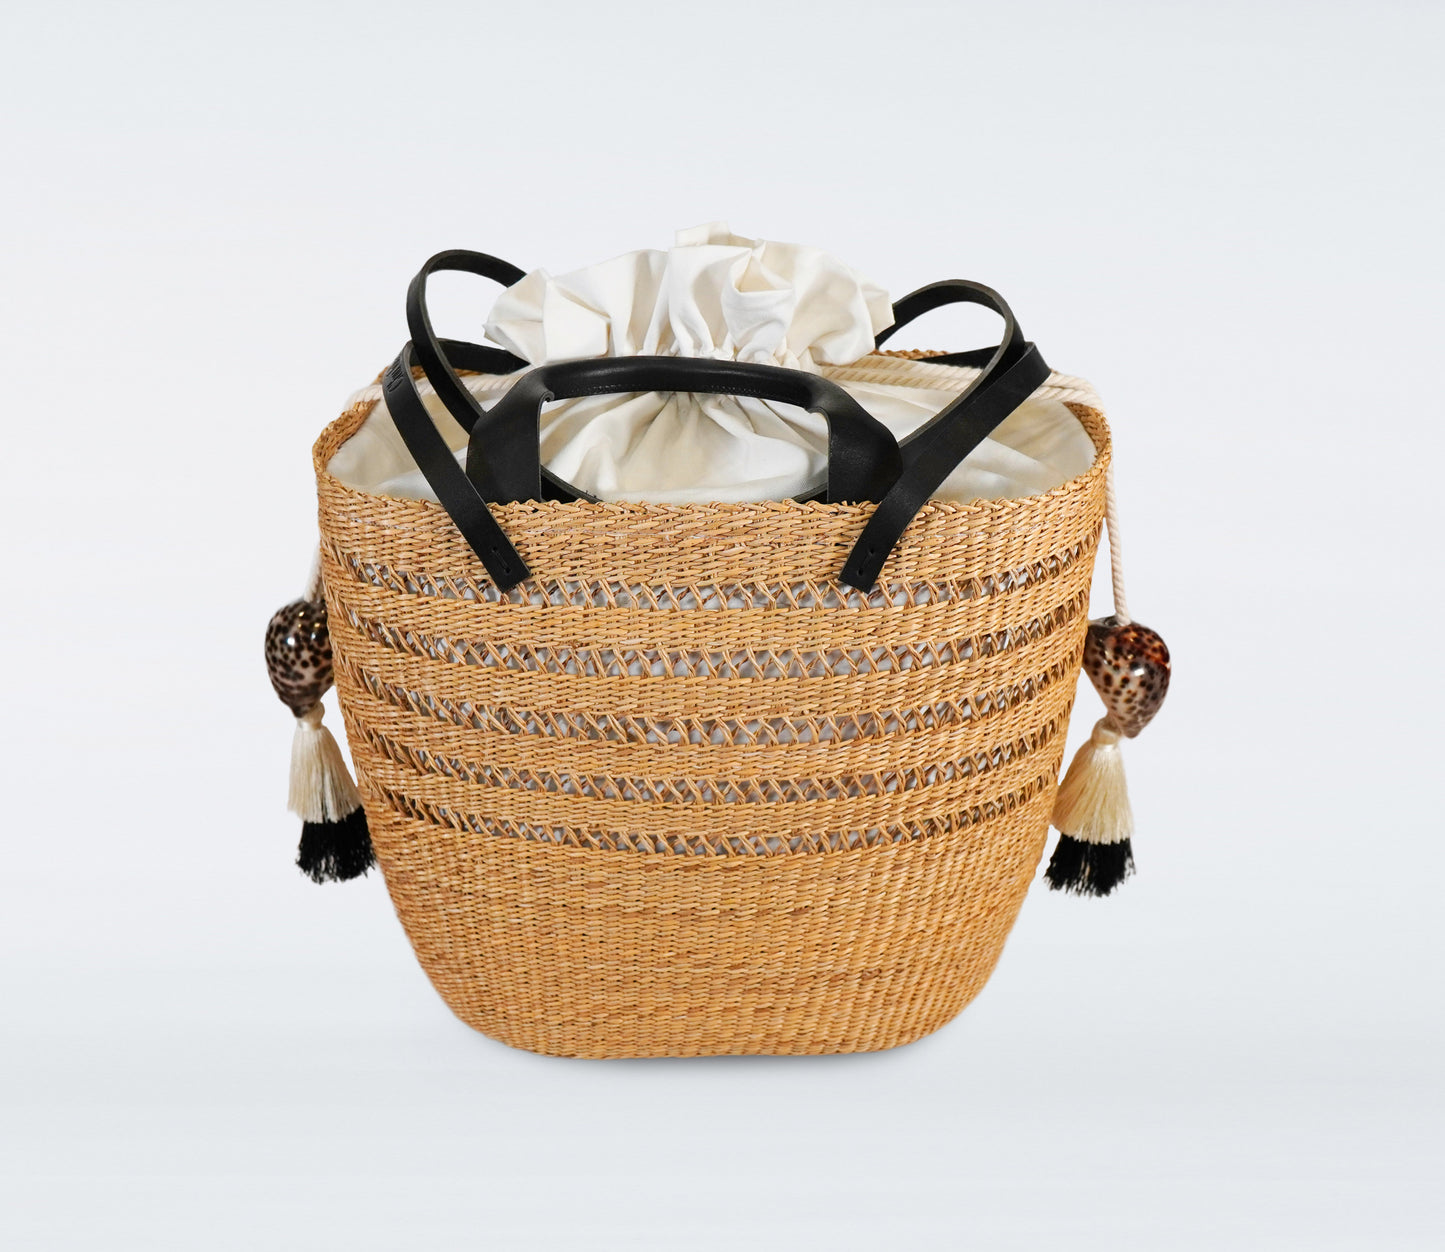 Large black basket in straw, black recycled leather handles, cotton bag and natural shells.